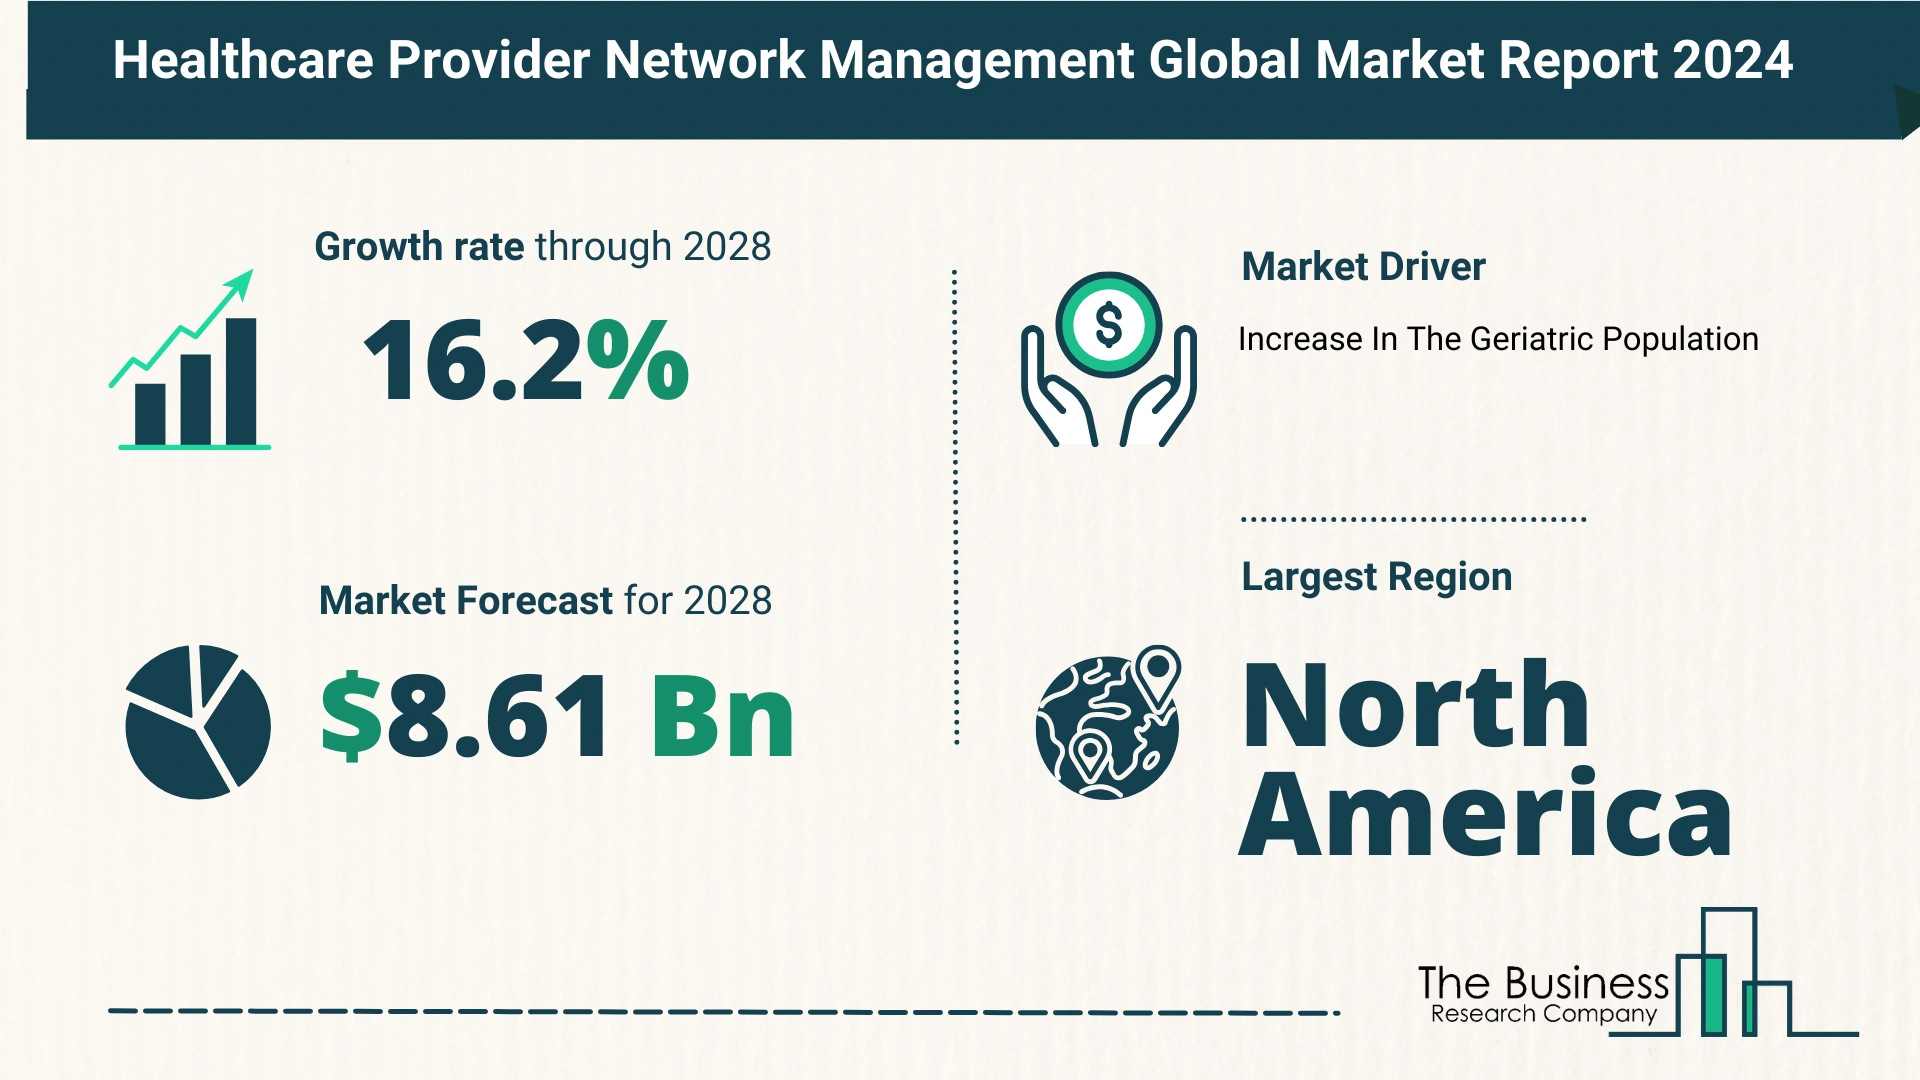 Top 5 Insights From The Healthcare Provider Network Management Market Report 2024